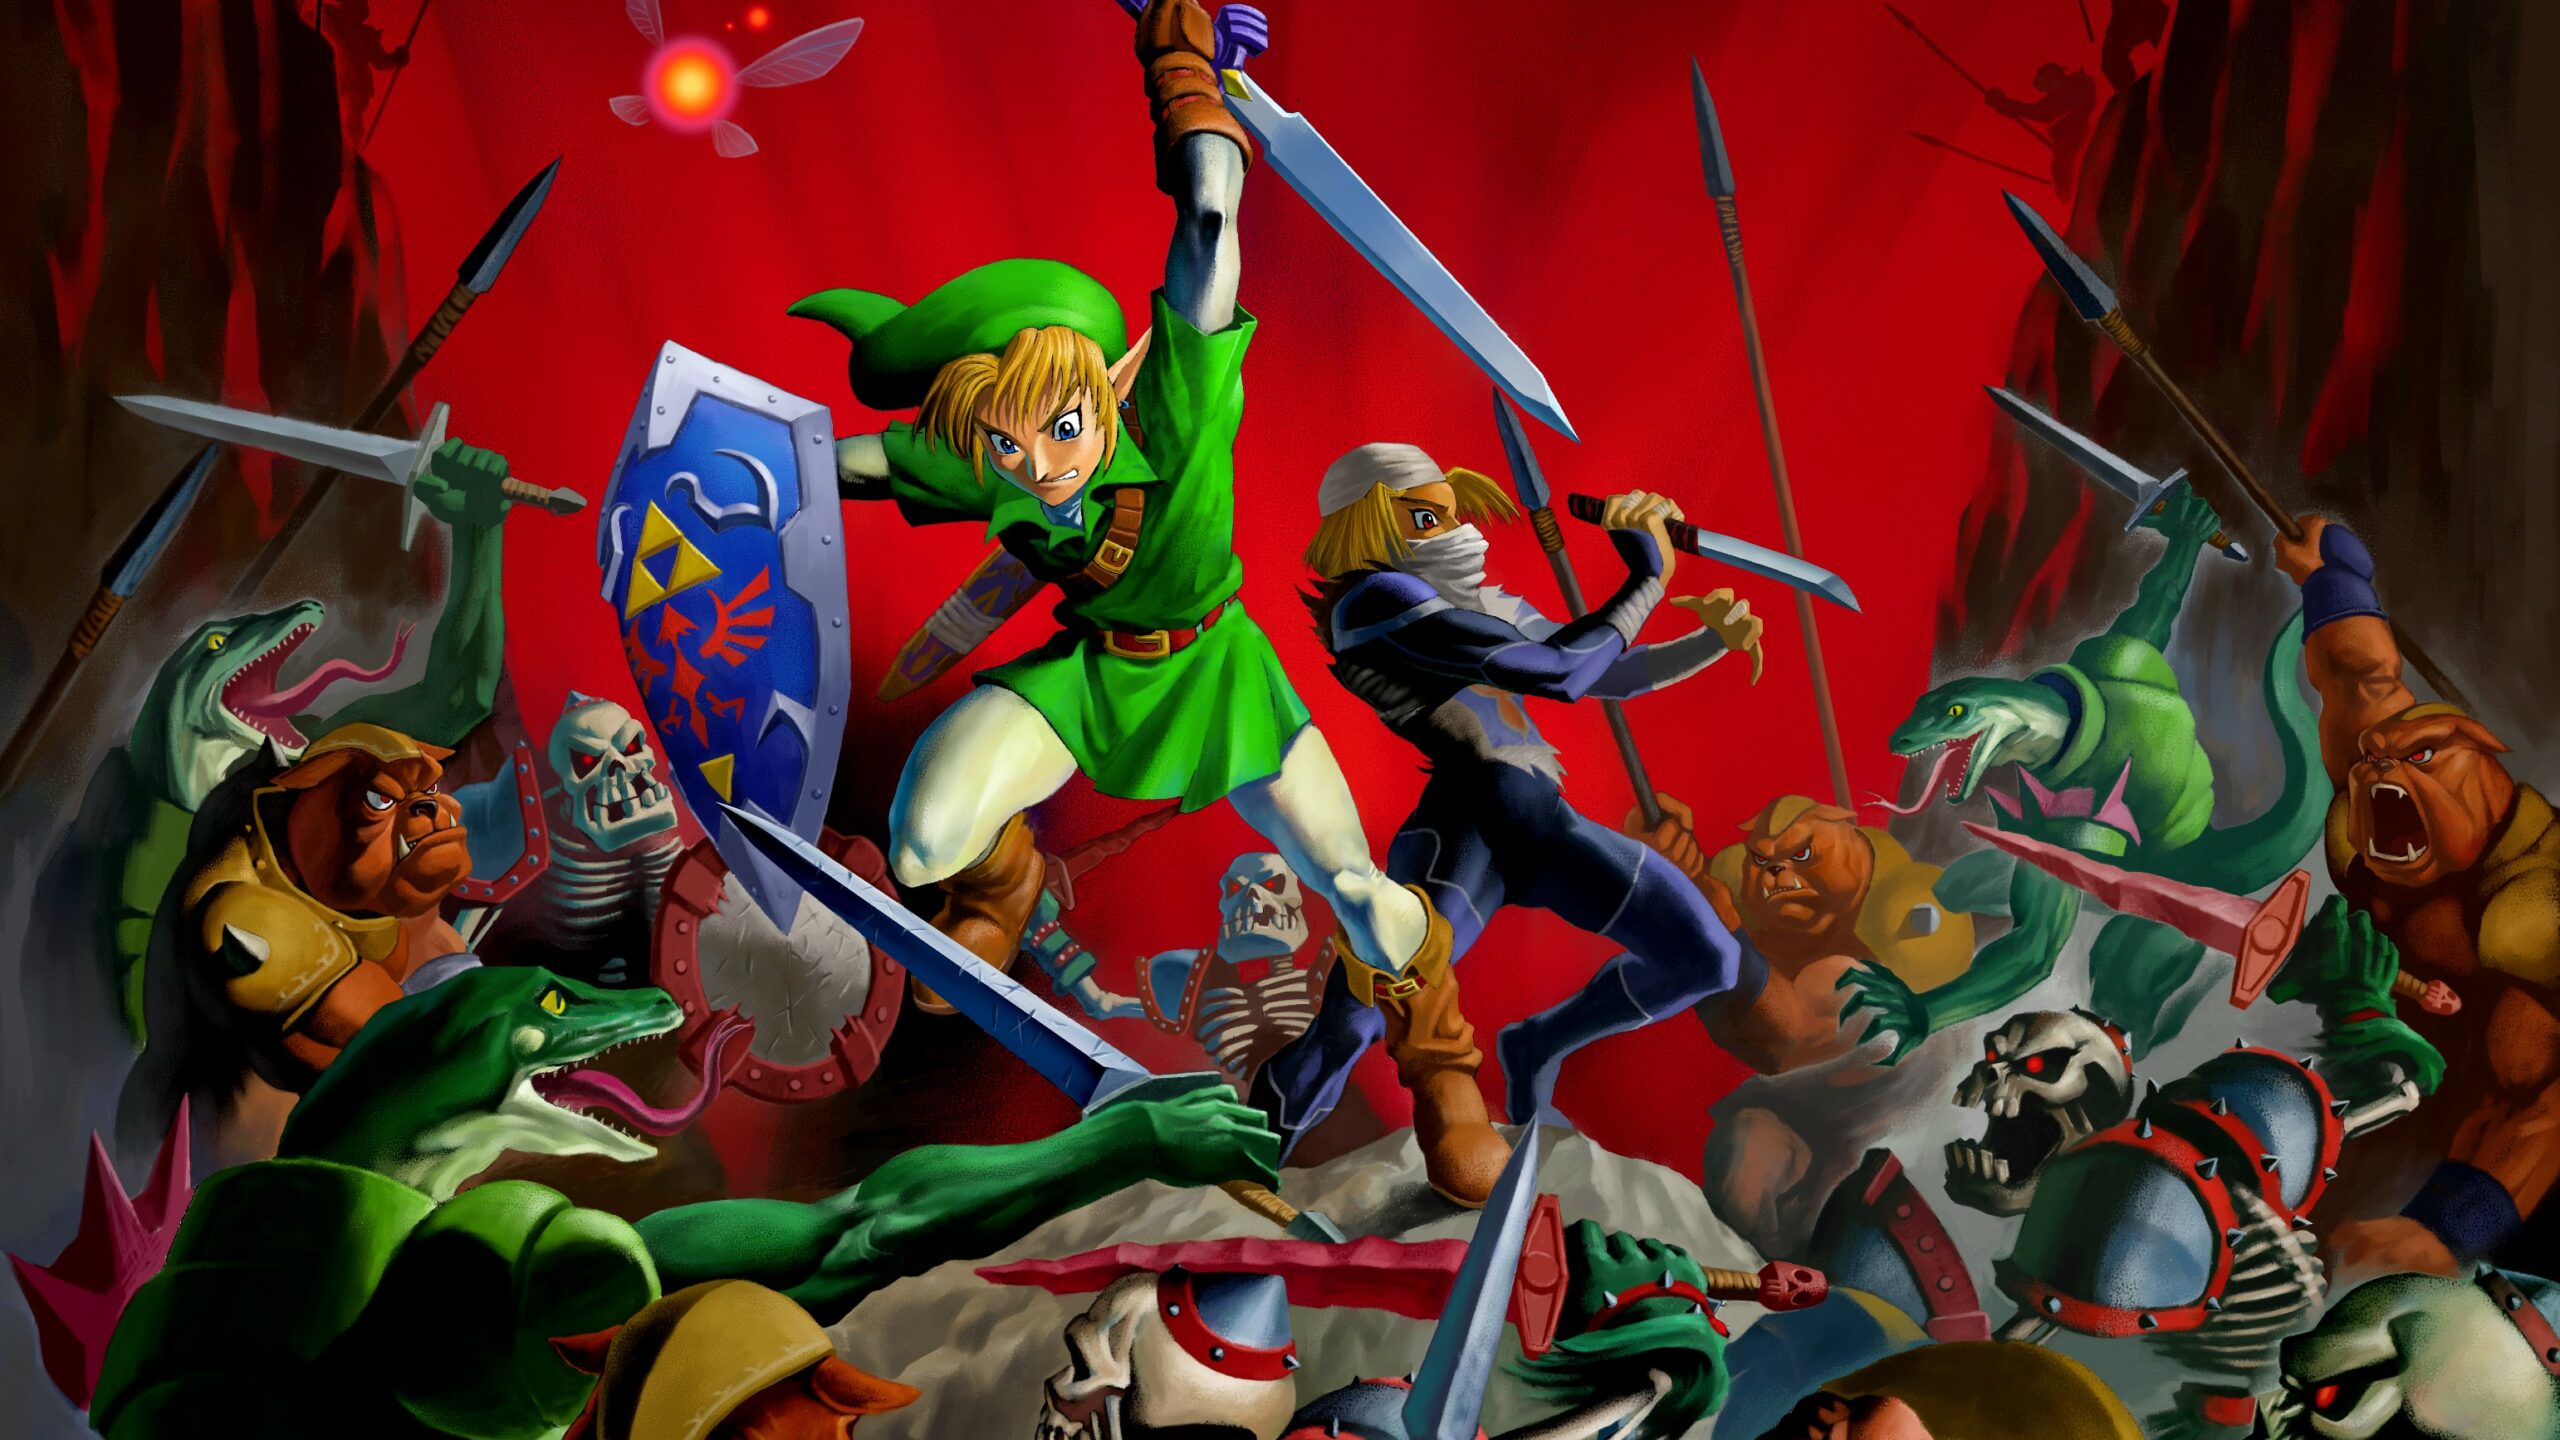 A new 'unofficial' Ocarina of Time PC version has been released